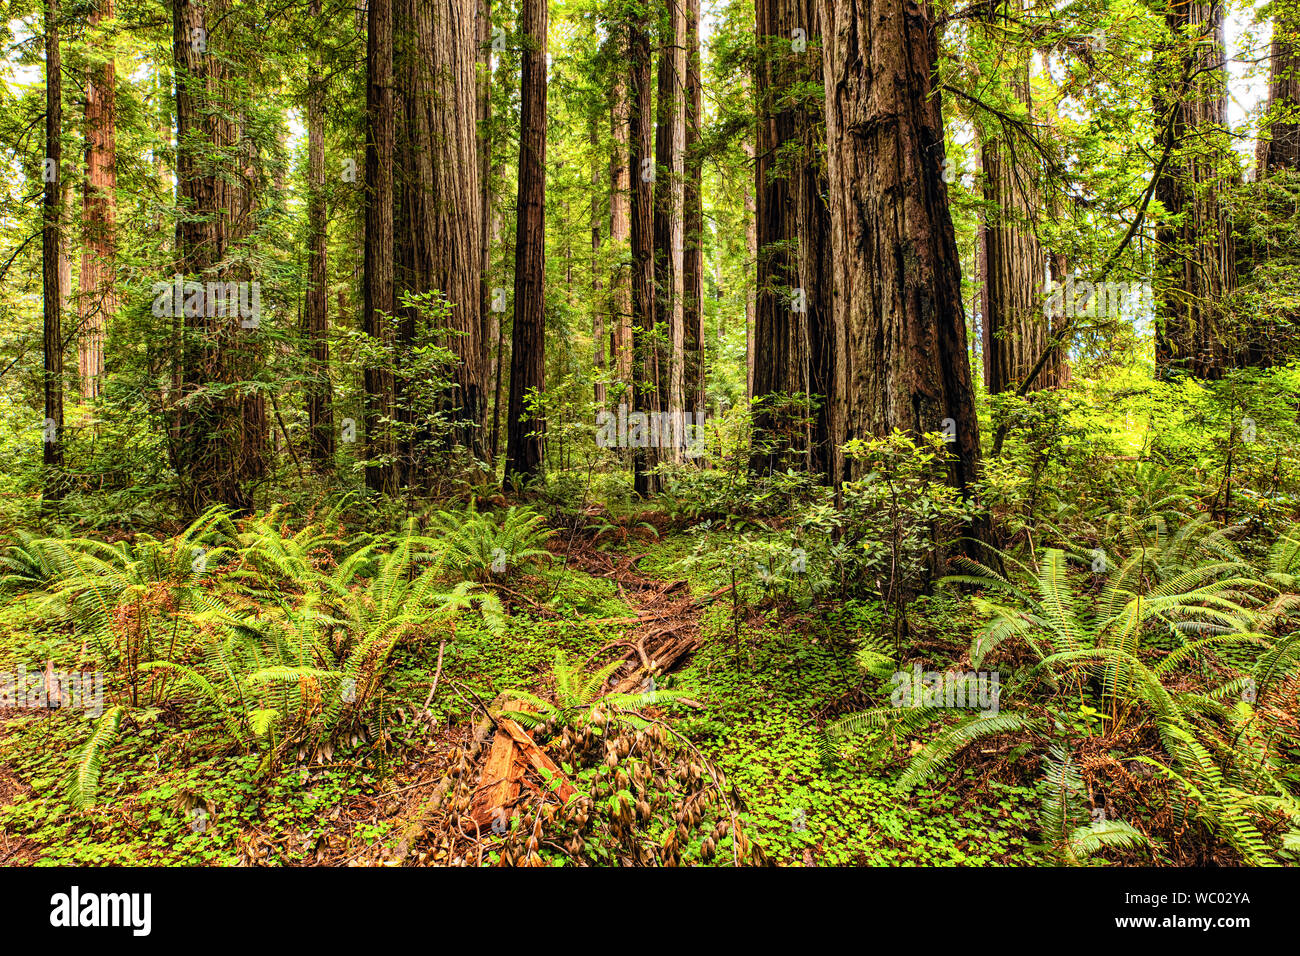 Ferns and old growth California Redwoods in Jedediah Smith State Park near Crescent City, California. Stock Photo